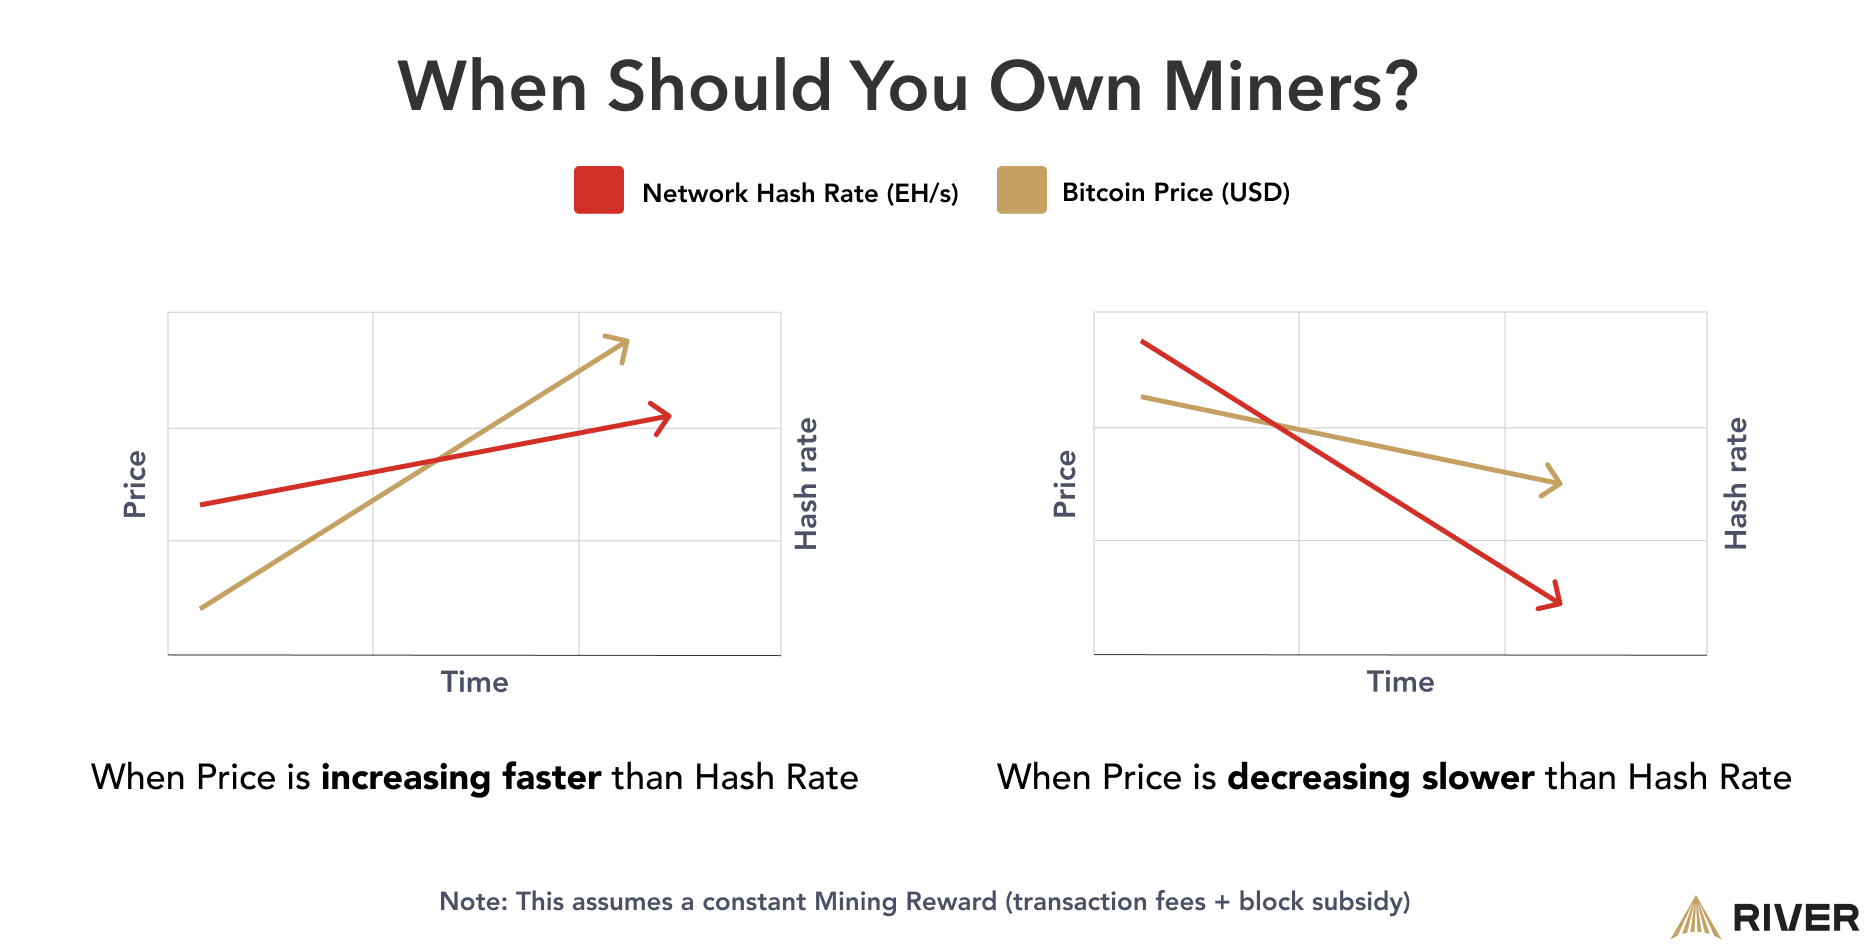 Basic heuristic to determine when exposure to hash rate is preferable